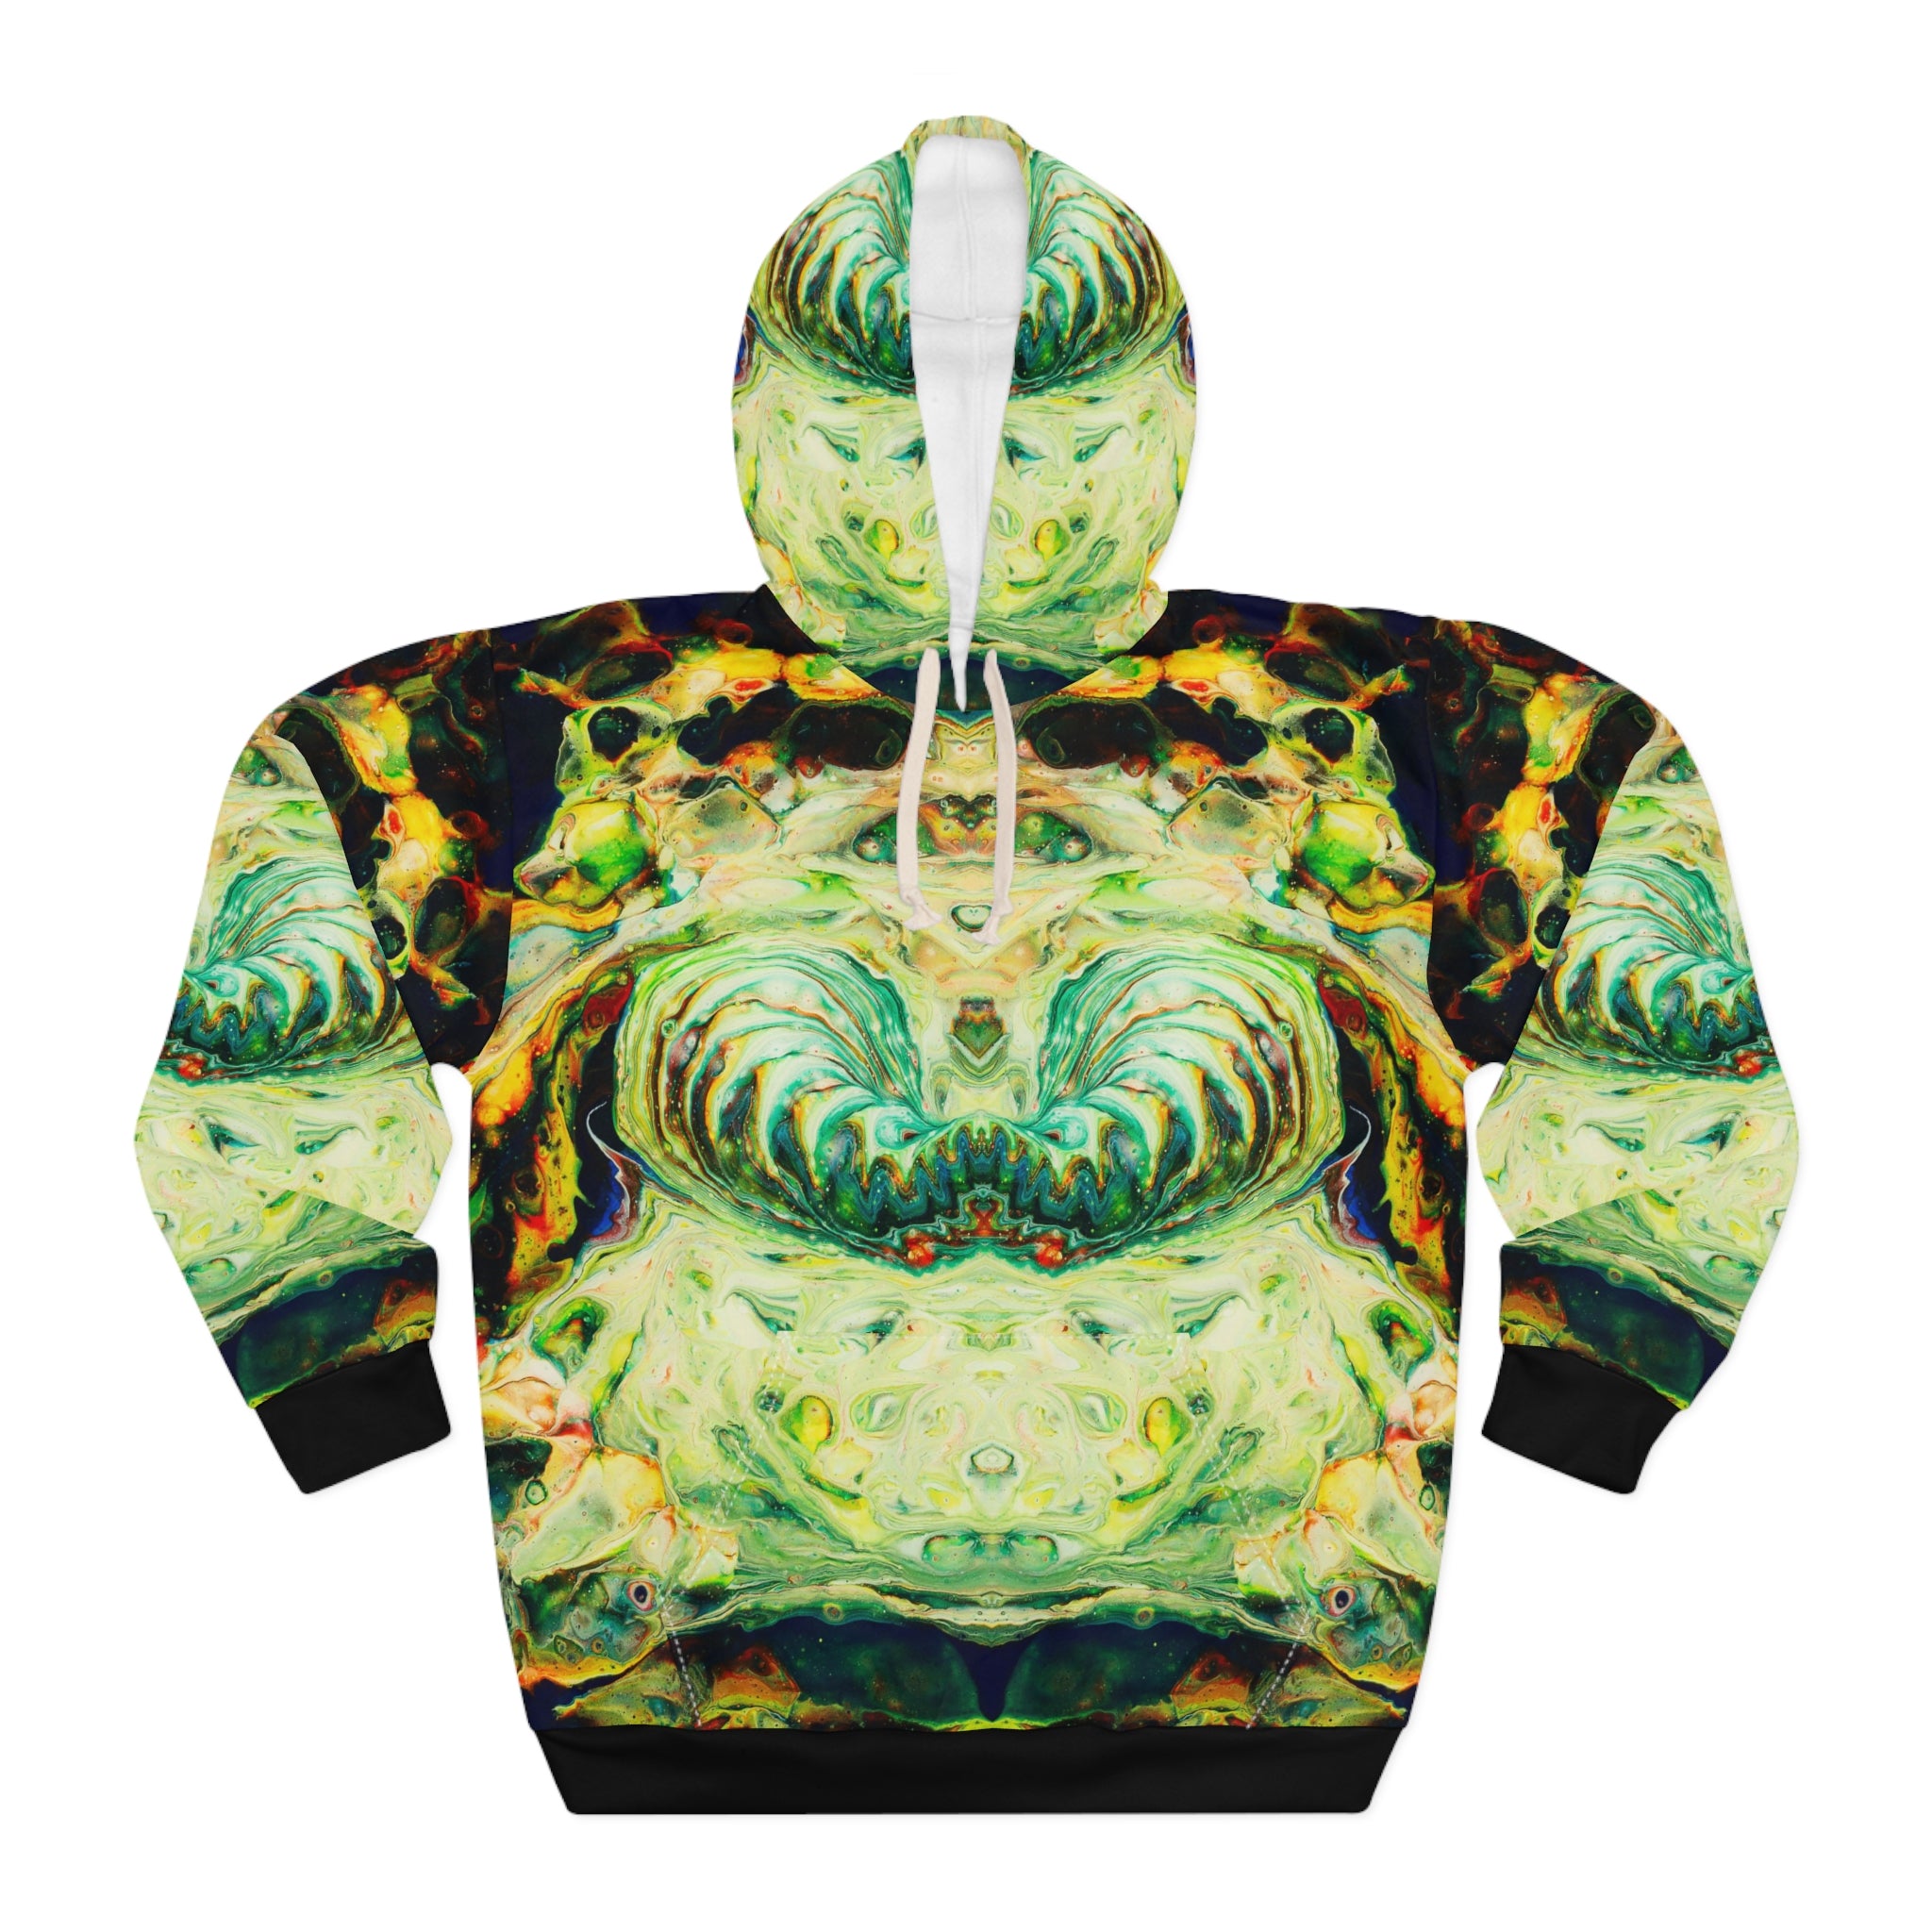 Cameron Creations - Galactical Horse - Pullover Hoodie - Front